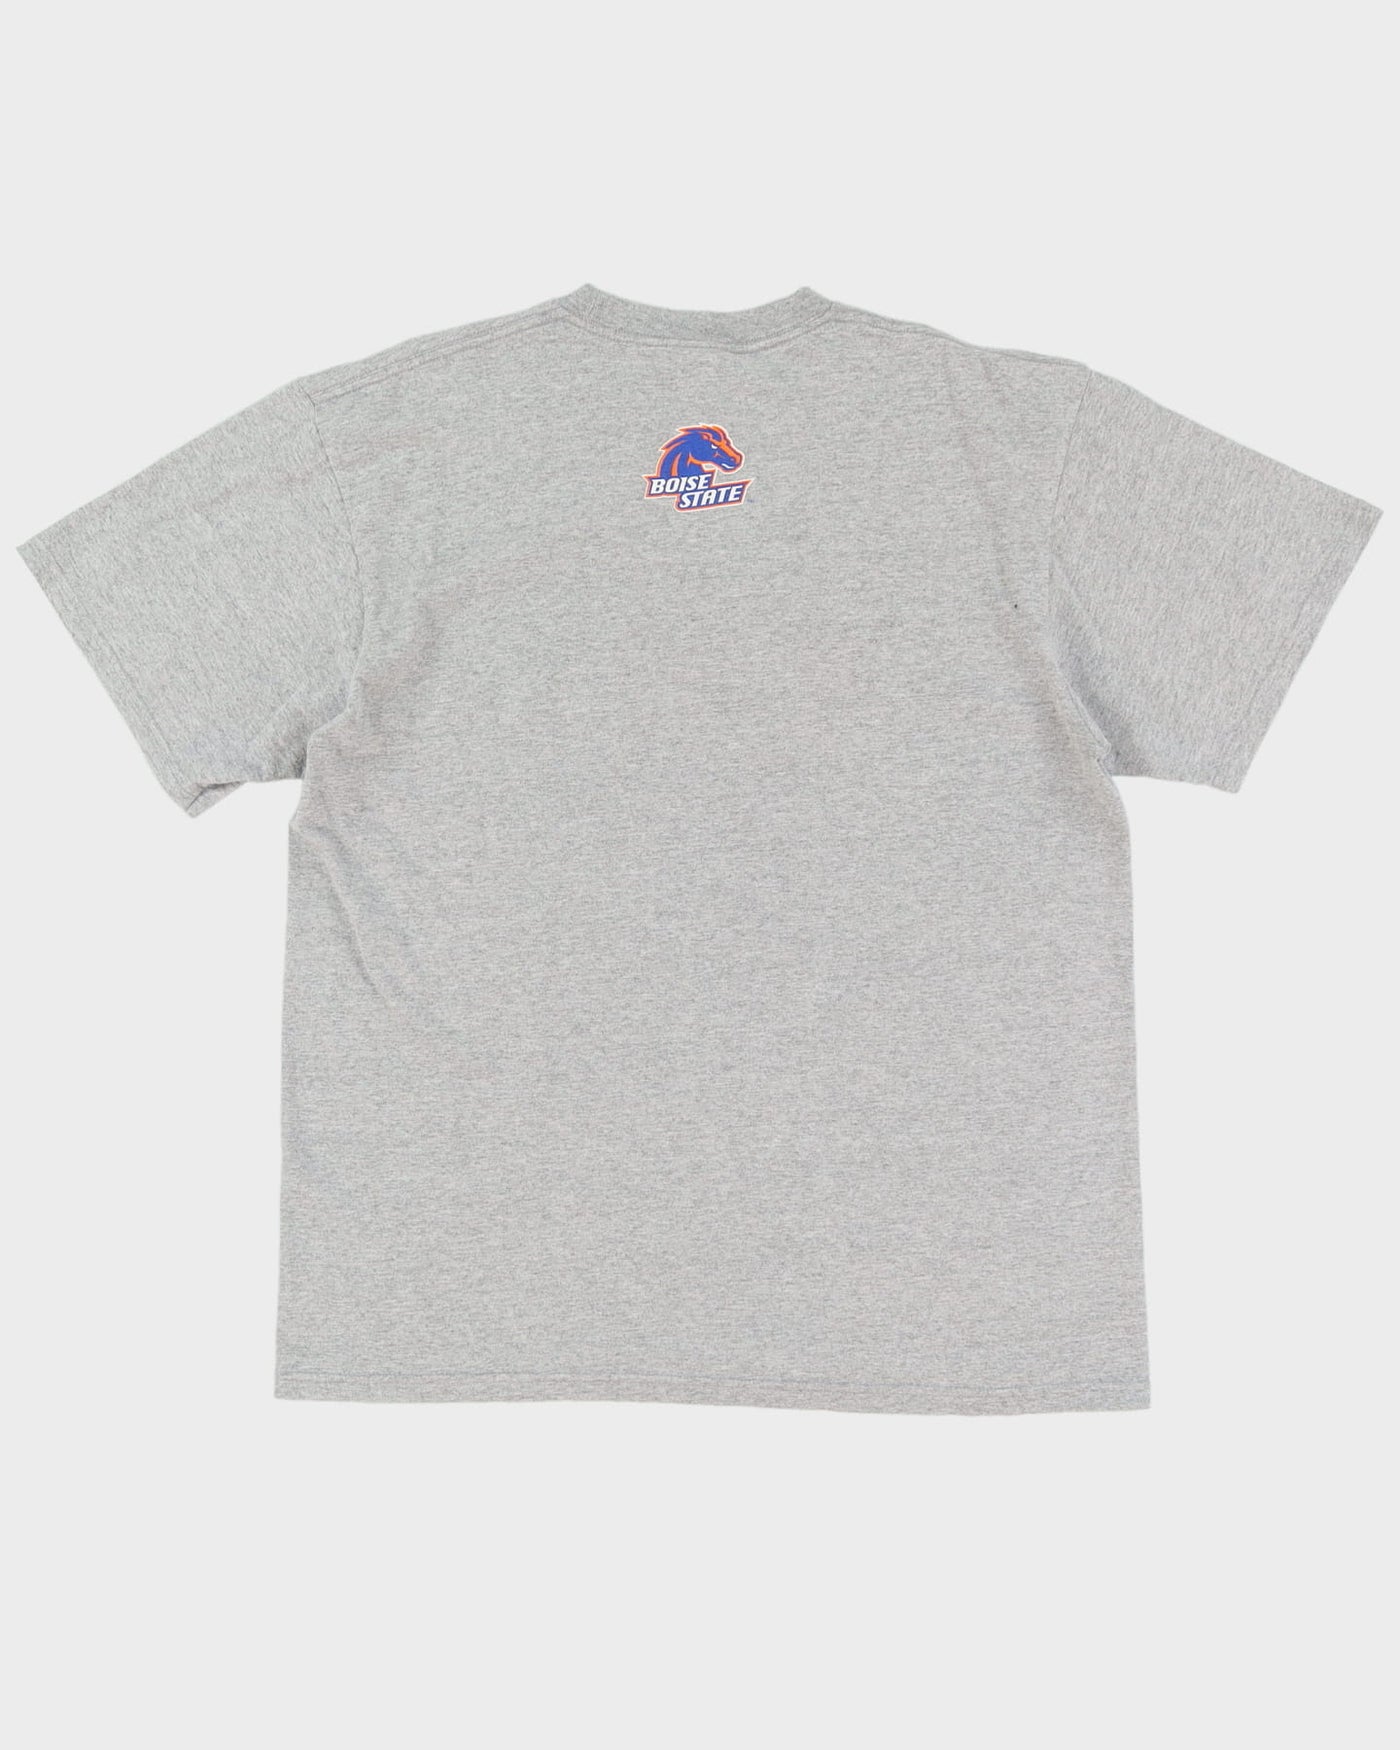 90s Nike Oversized Boise State Grey Graphic T-Shirt - L